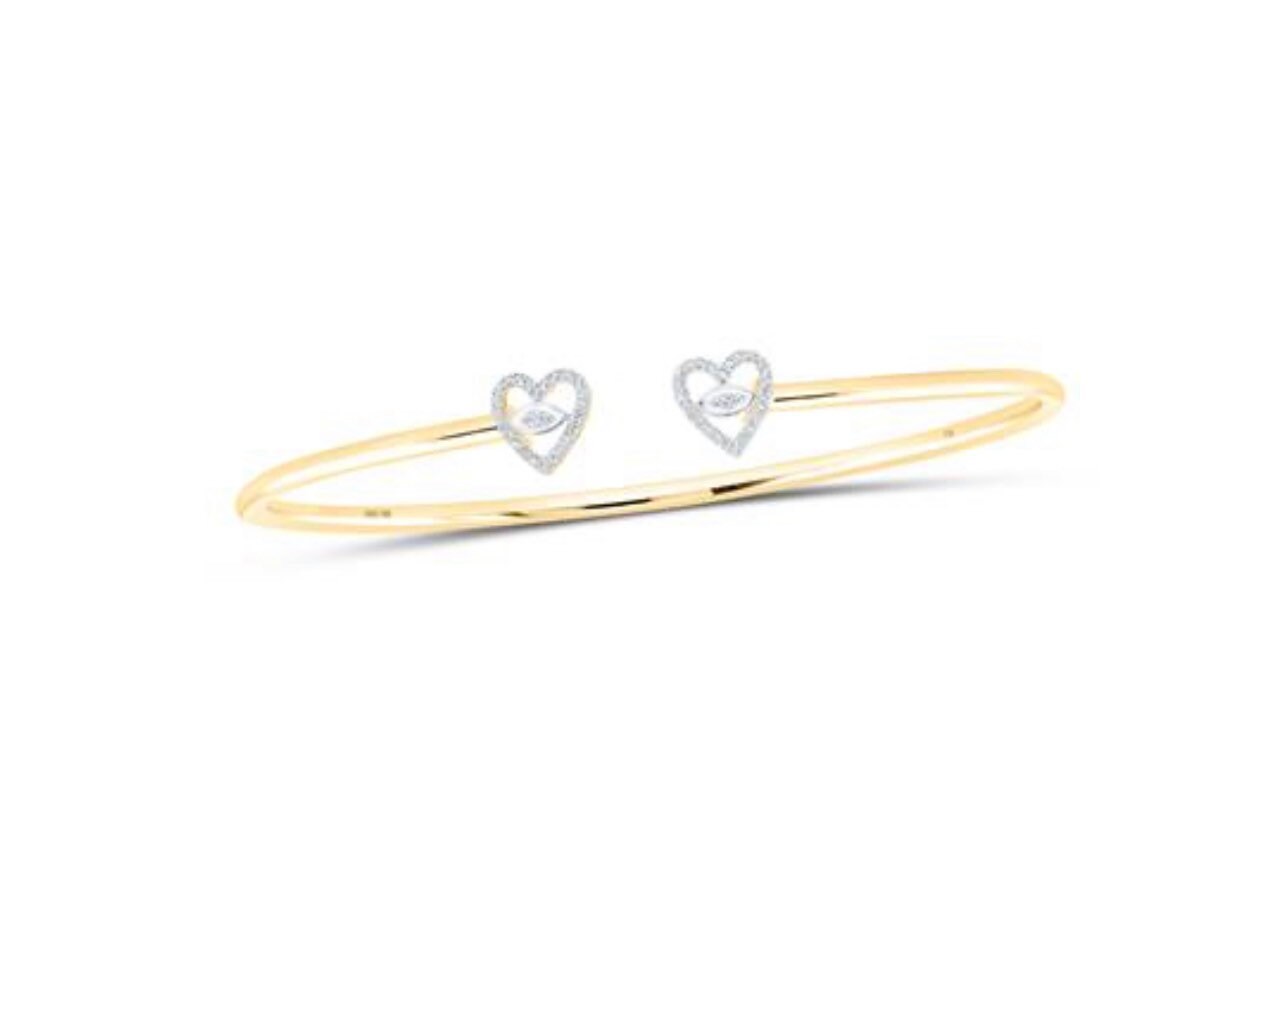 10k solid real gold real Diamond heart bangle, 100% genuine natural diamond, Free Appraisal, beautiful elegant gift for your loved one, Sale